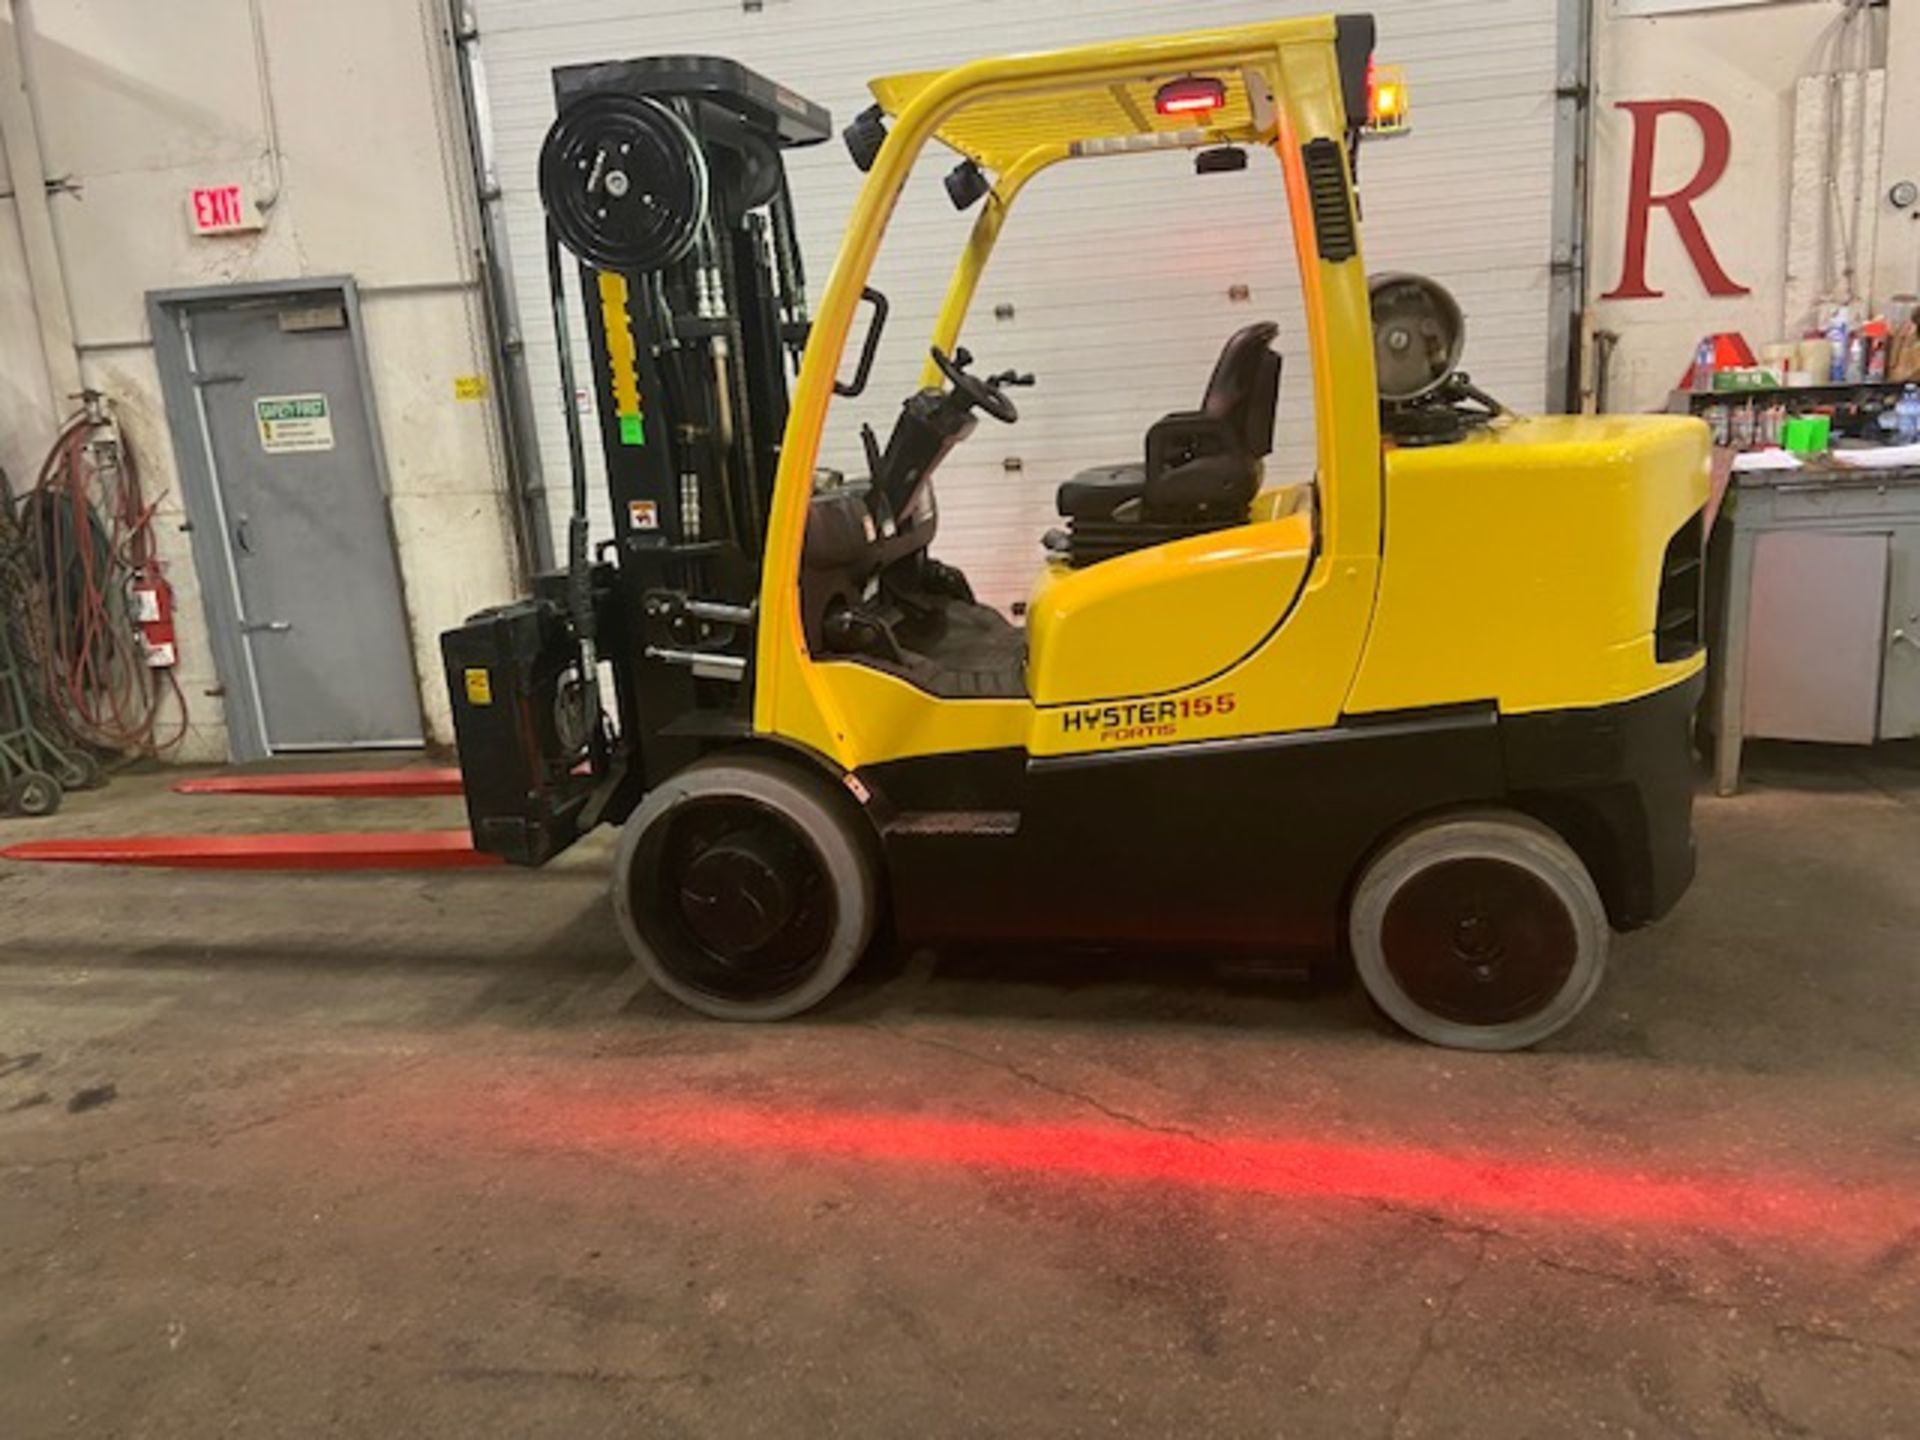 FREE CUSTOMS - MINT 2016 Hyster 15,500lbs Capacity Forklift S155FT LPG (propane) with sideshift w FP